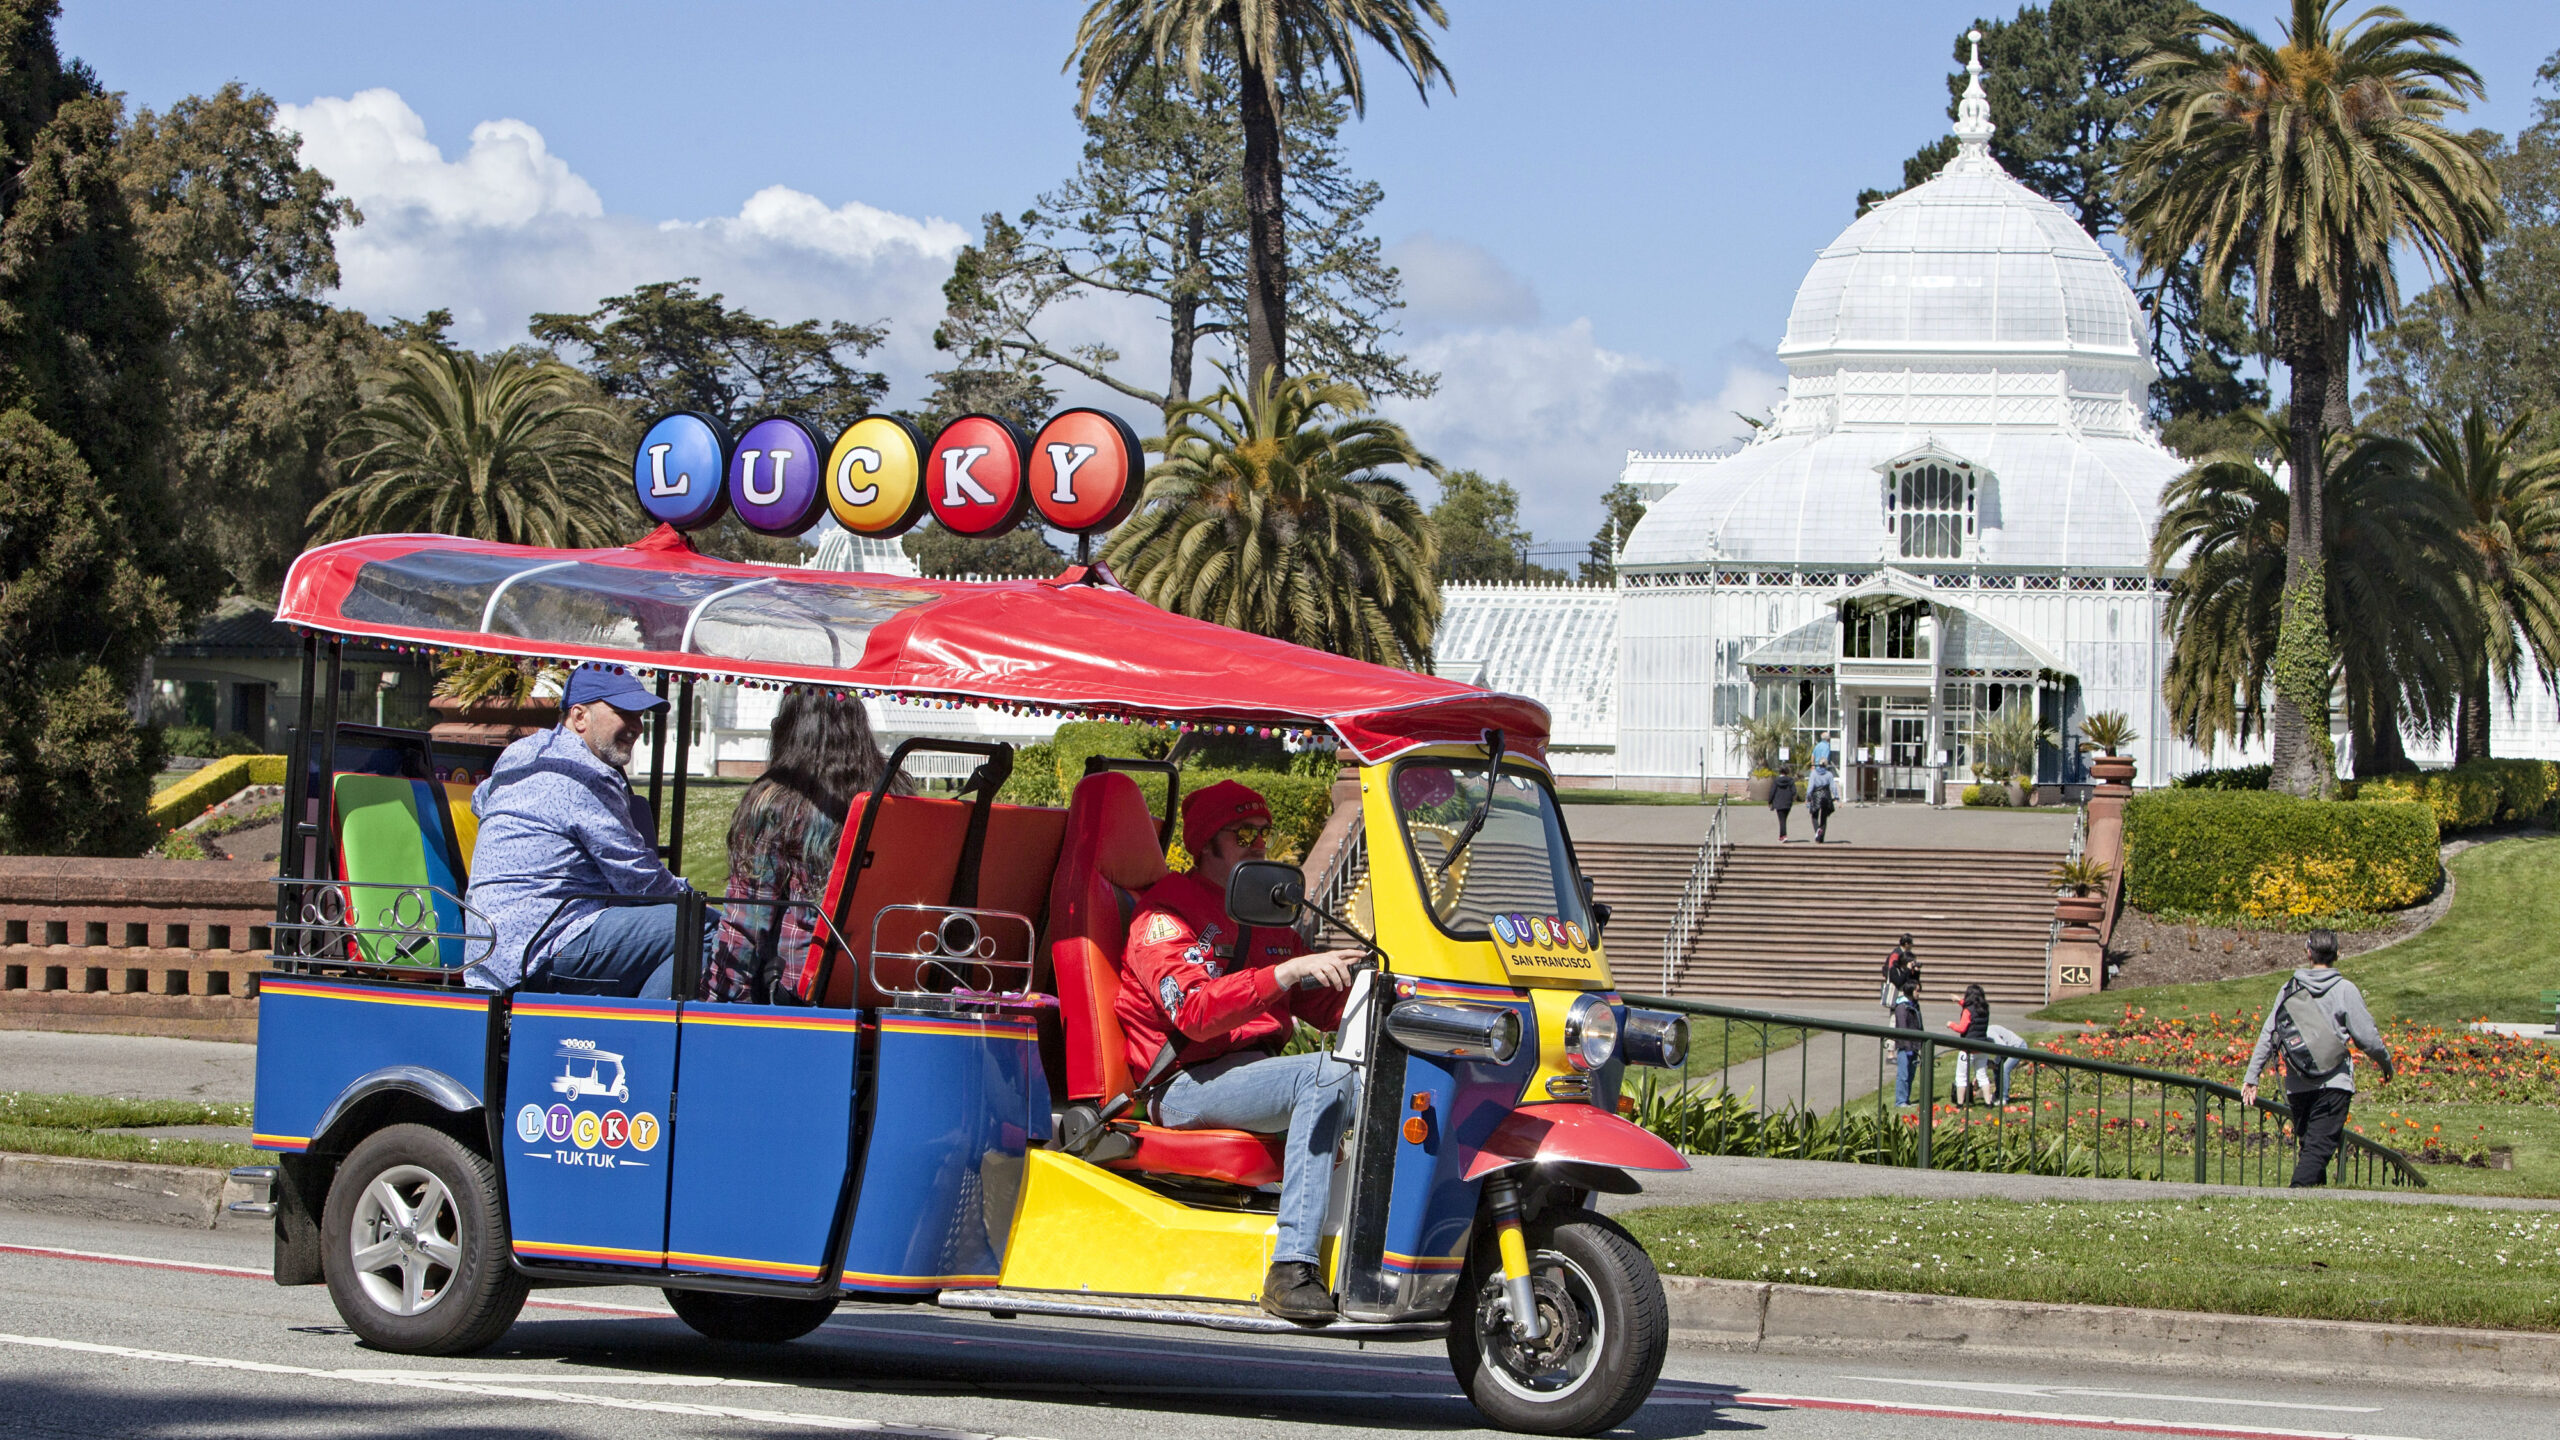 Lucky Tuk Tuk at the Conservatory of Flowers